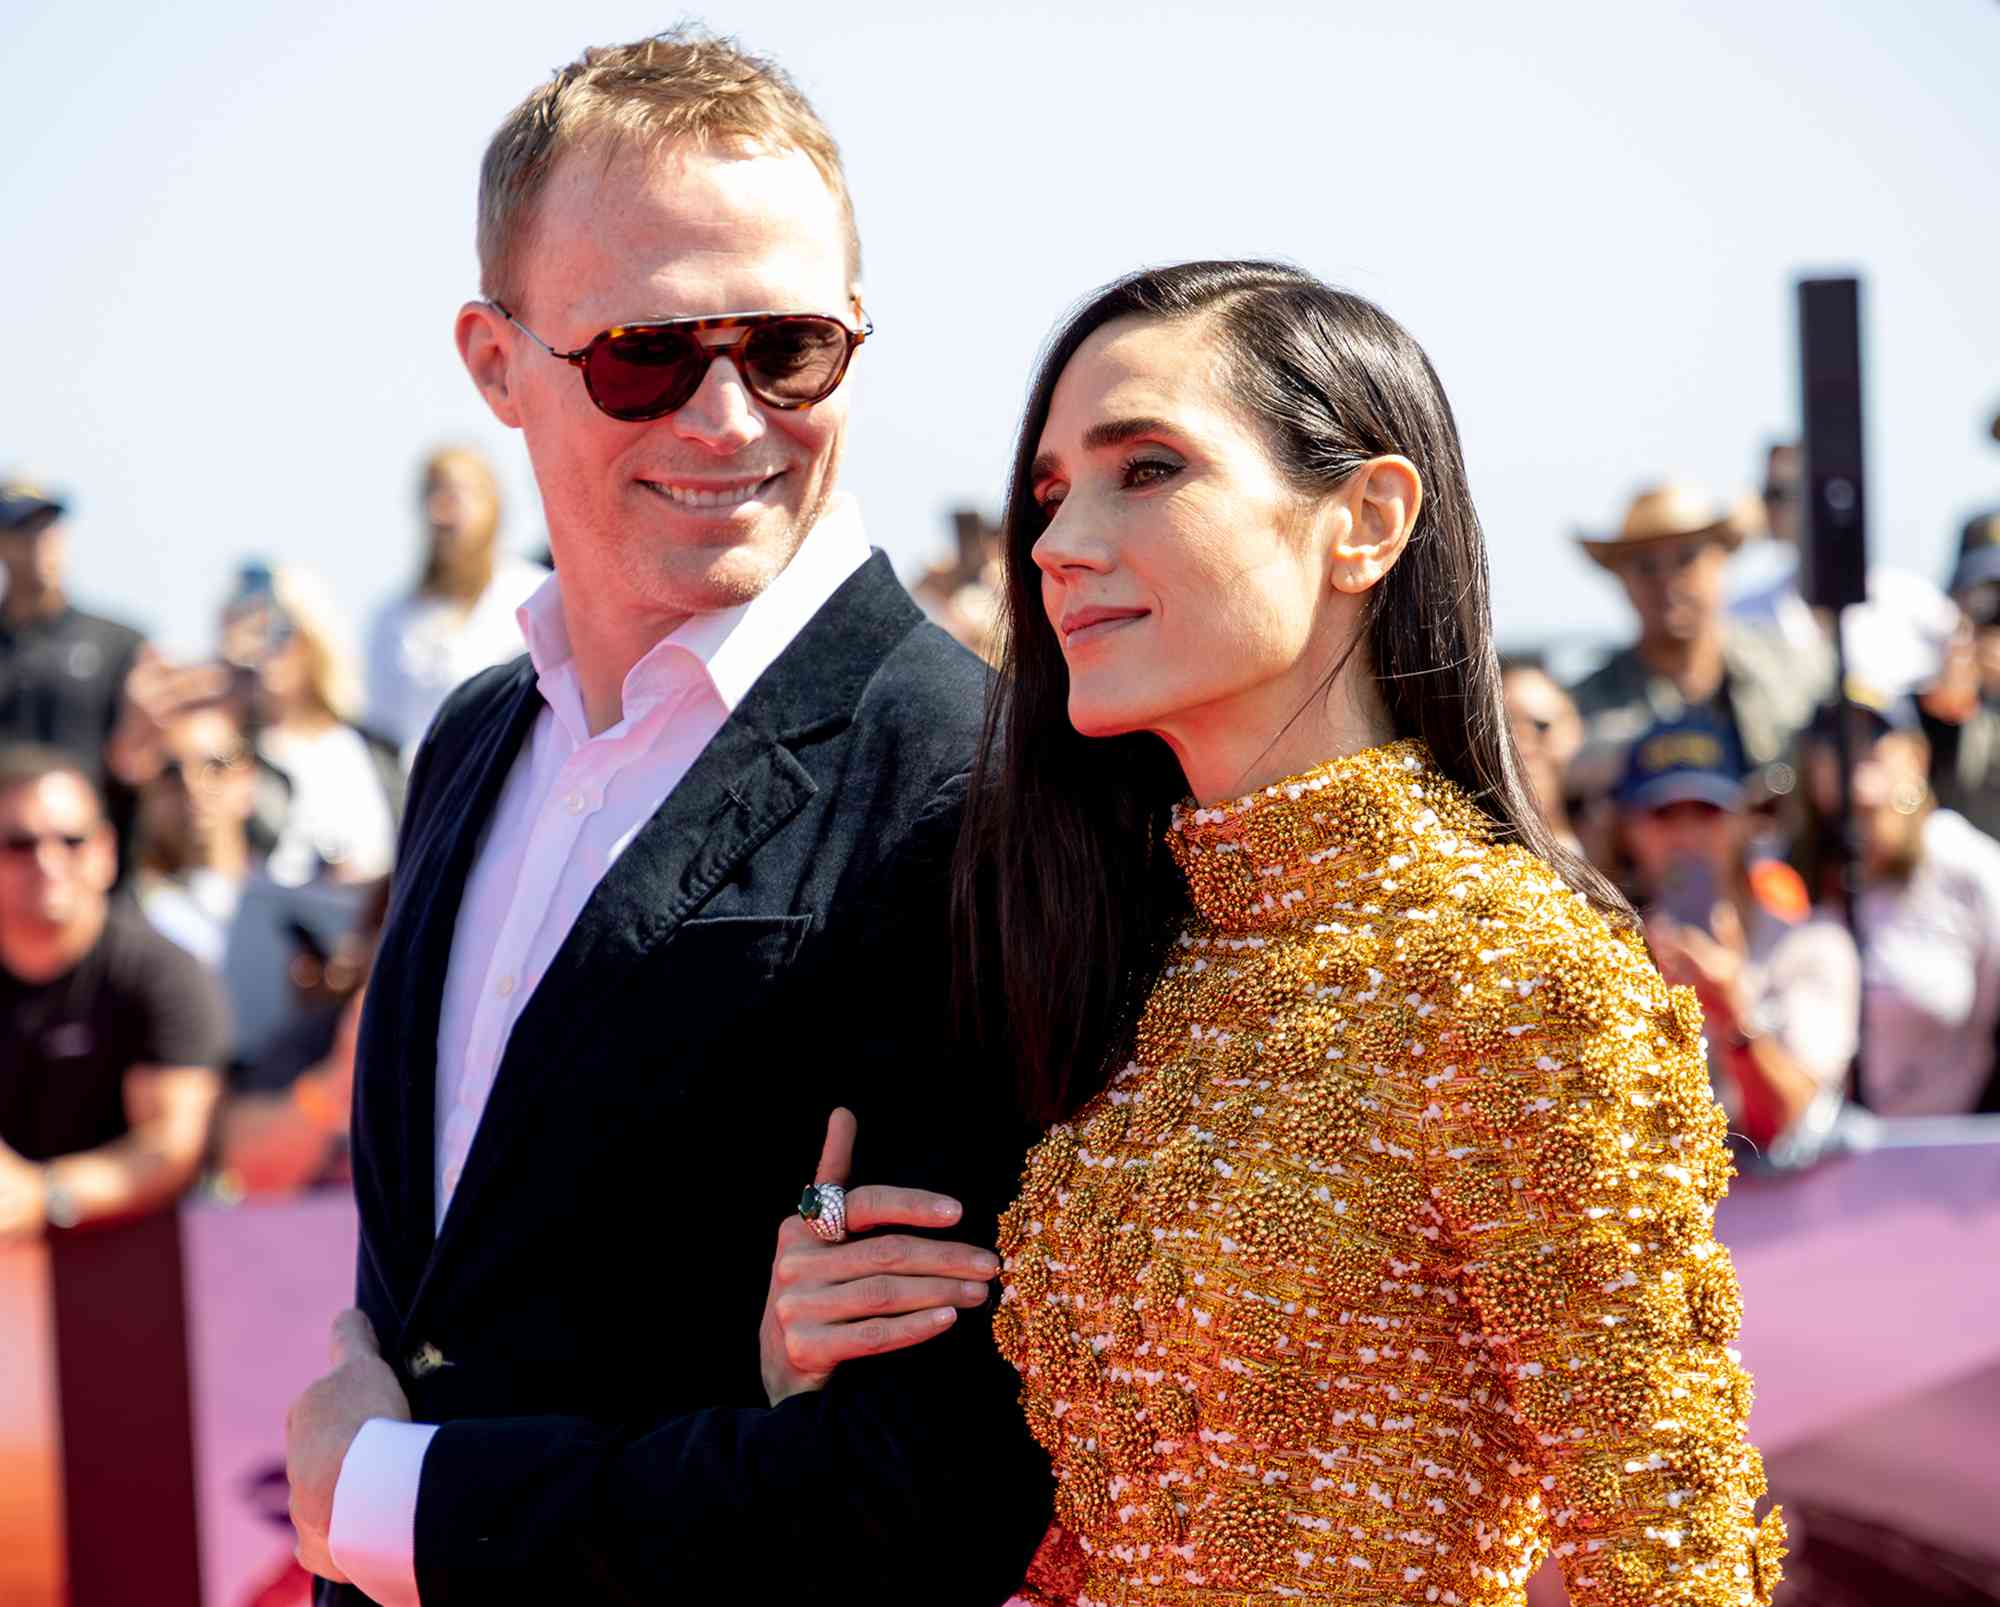 Paul Bettany and Jennifer Connelly attend the 'Top Gun: Maverick' world premiere on May 04, 2022 in San Diego, California